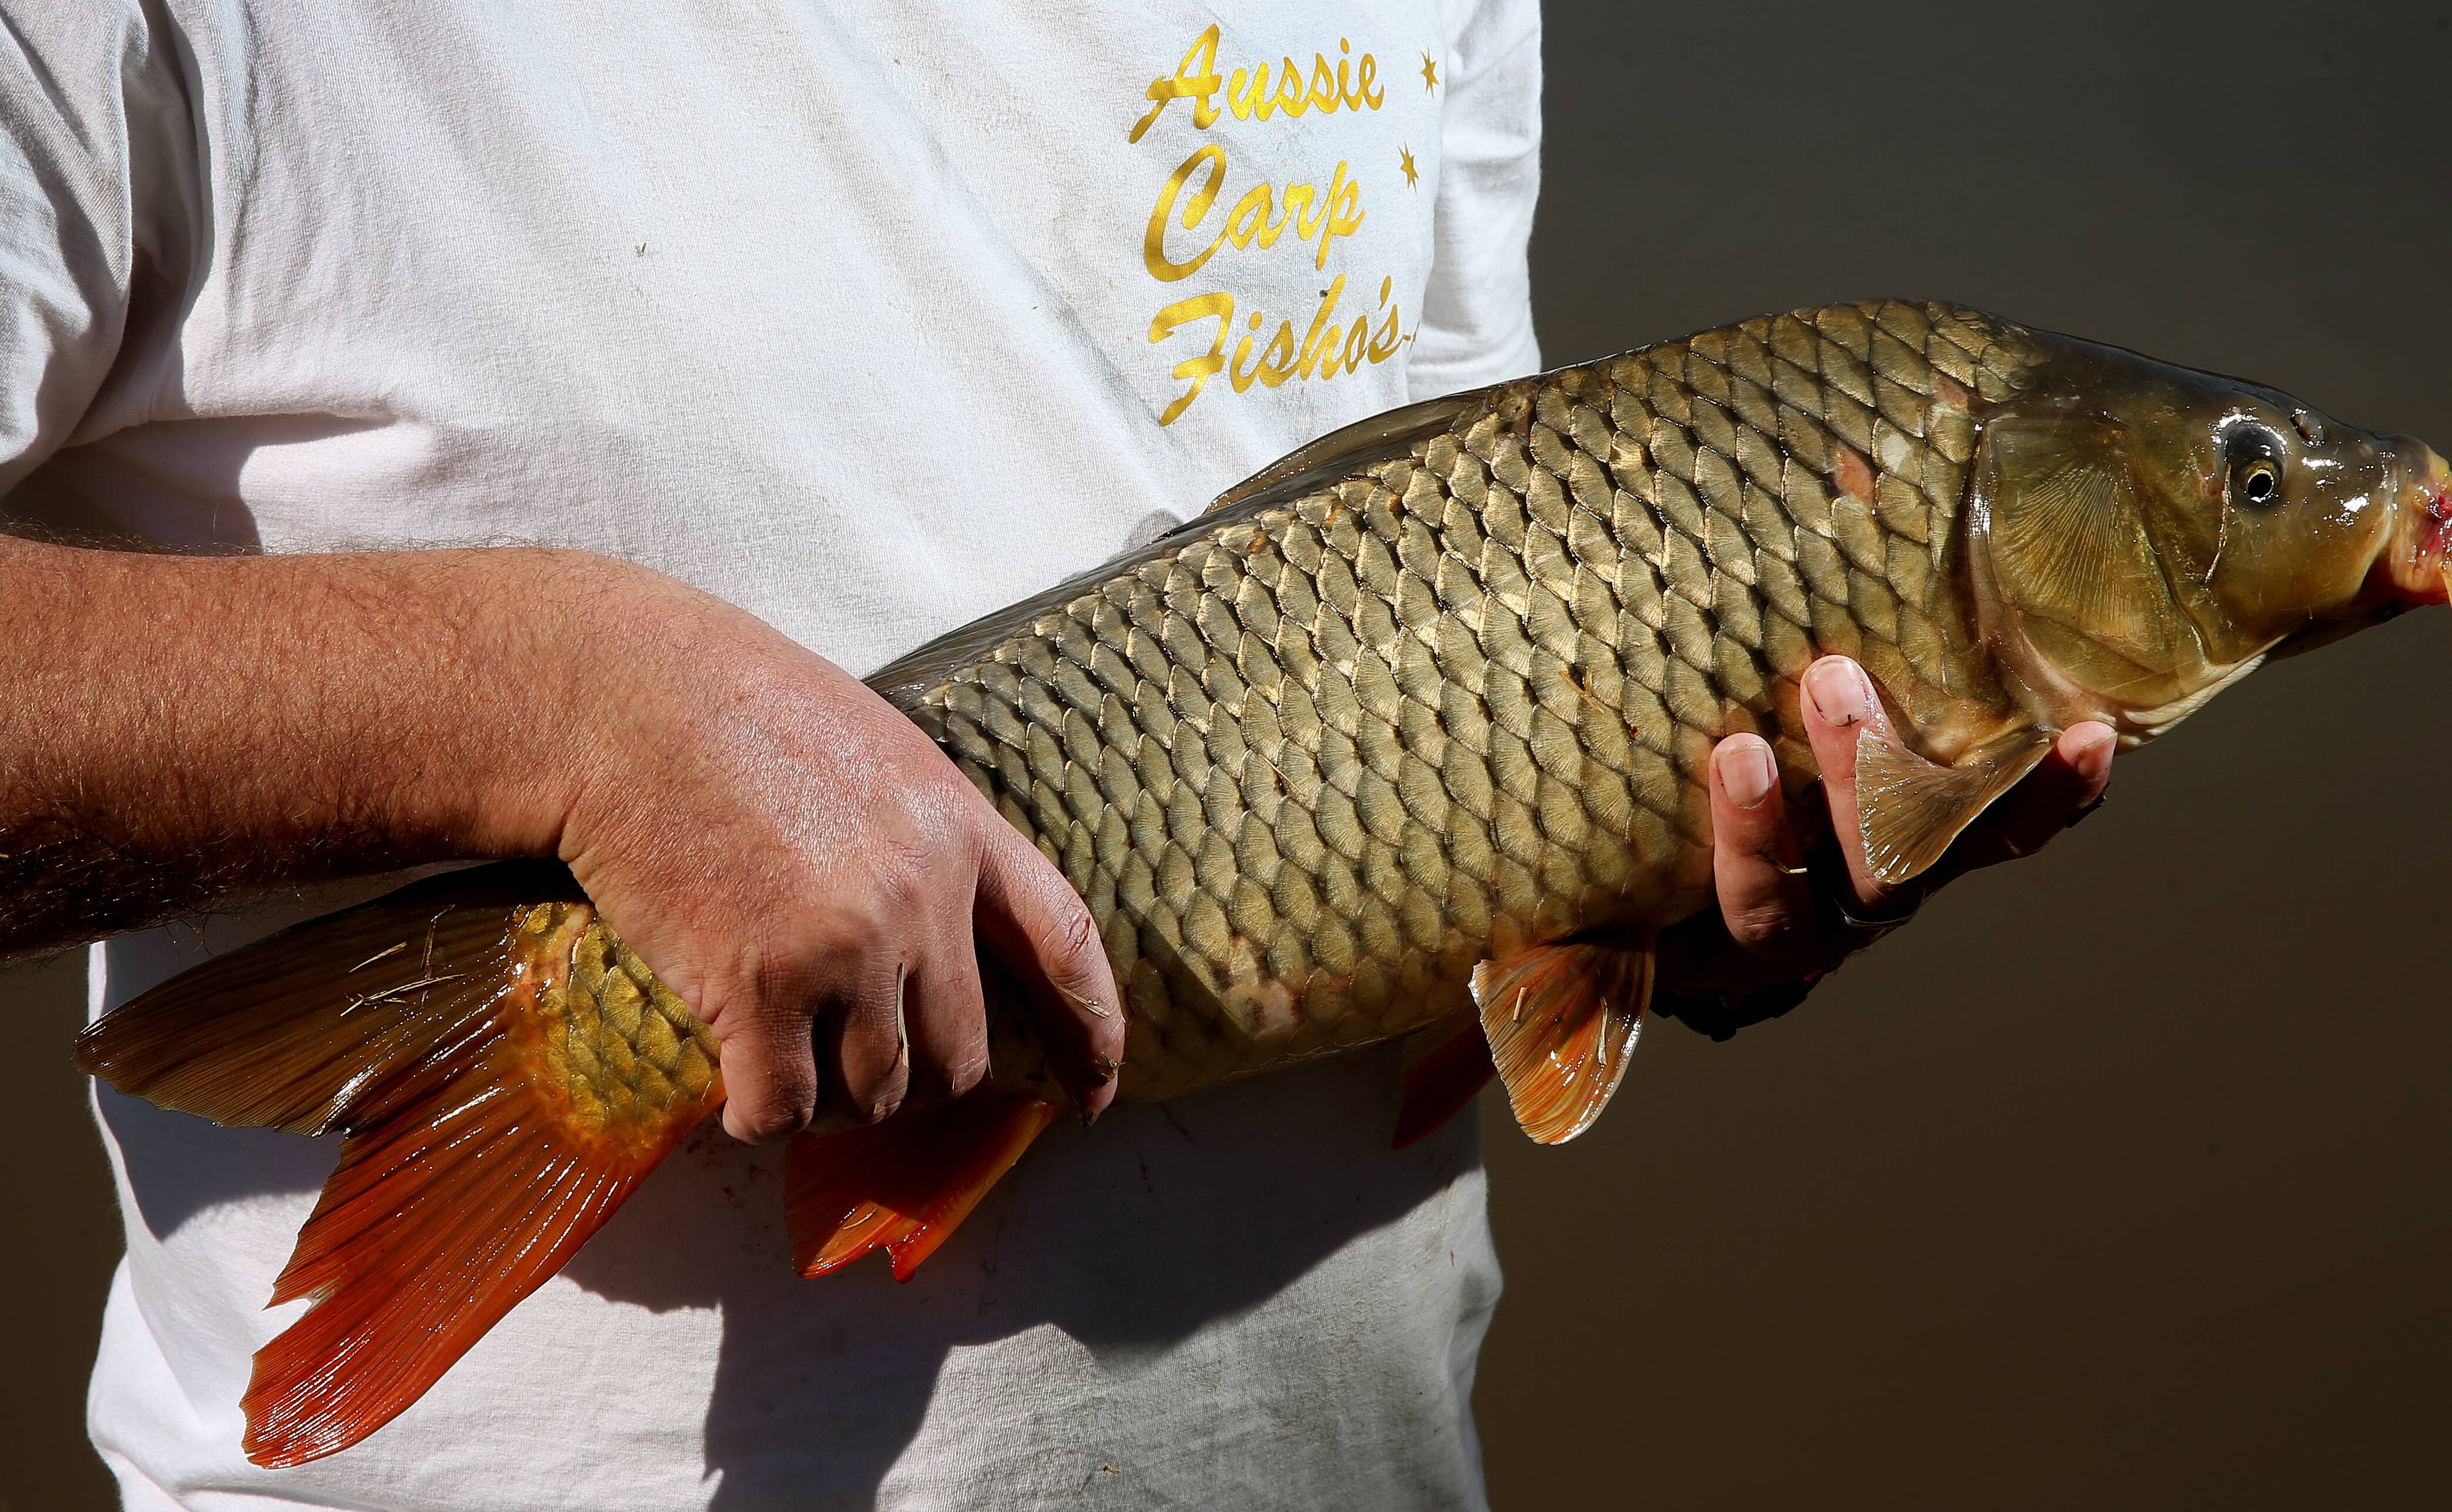 For the love of carp: Carp fishing enthusiast speaks out over herpes virus  concerns and alternate uses for the pest fish, The Northern Daily Leader